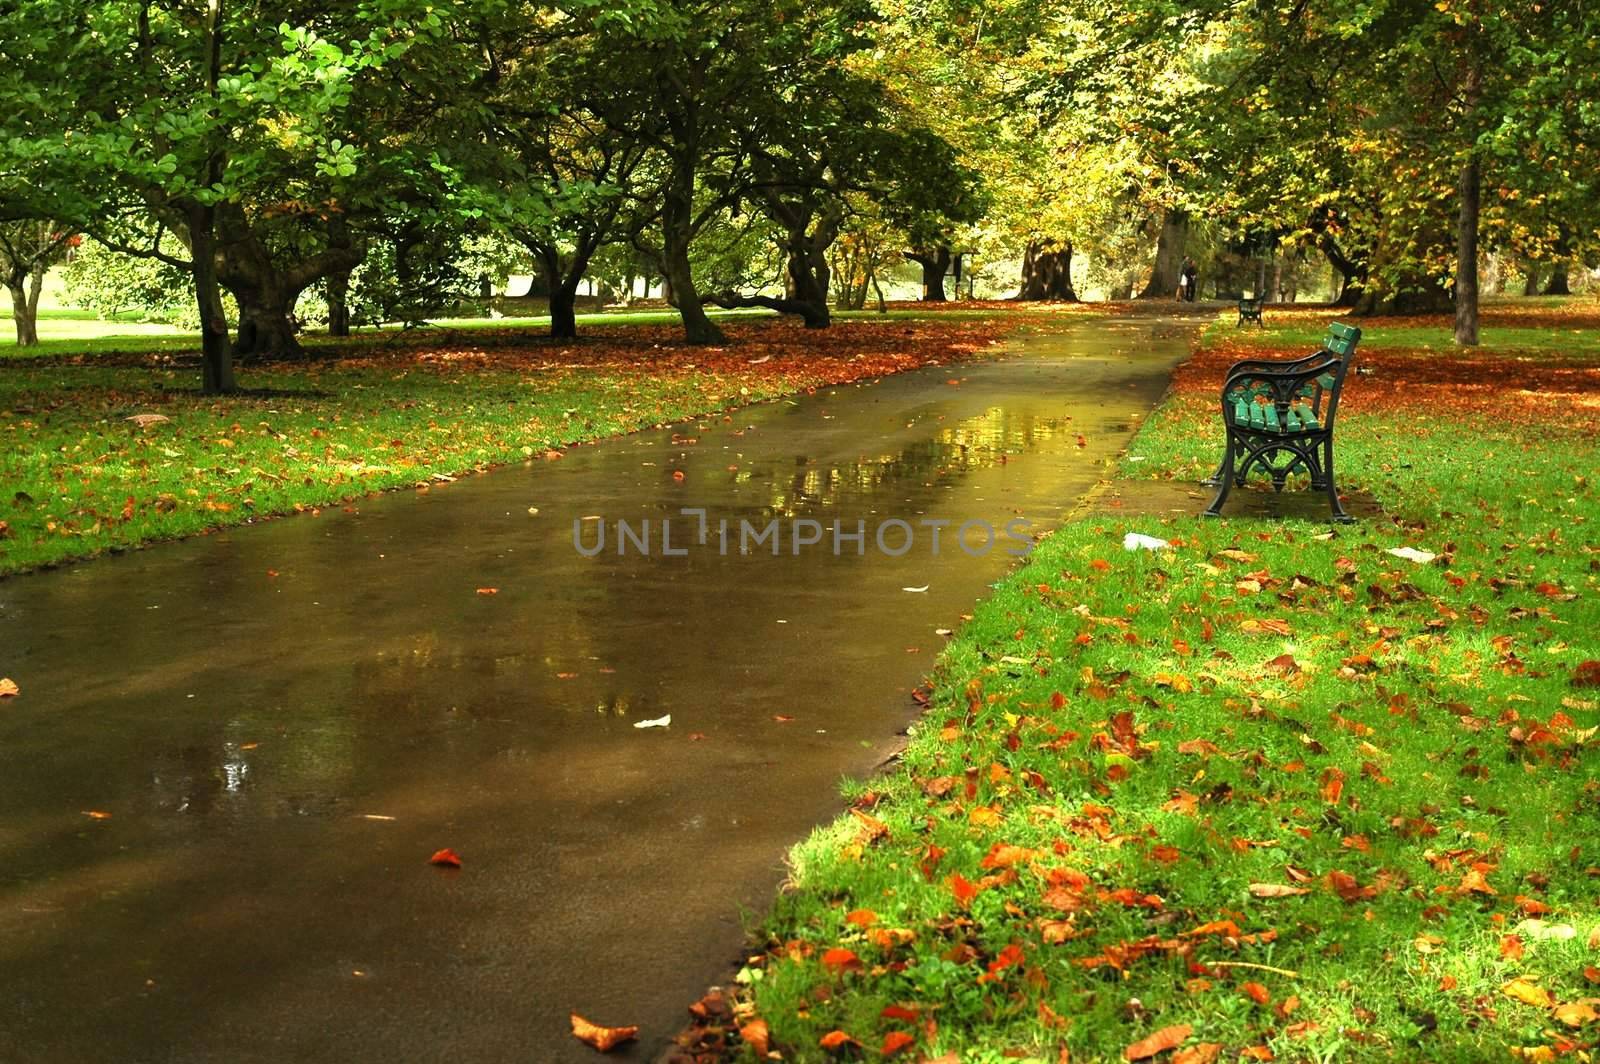 autumn cardiff park with bench, path, and leaves on the field